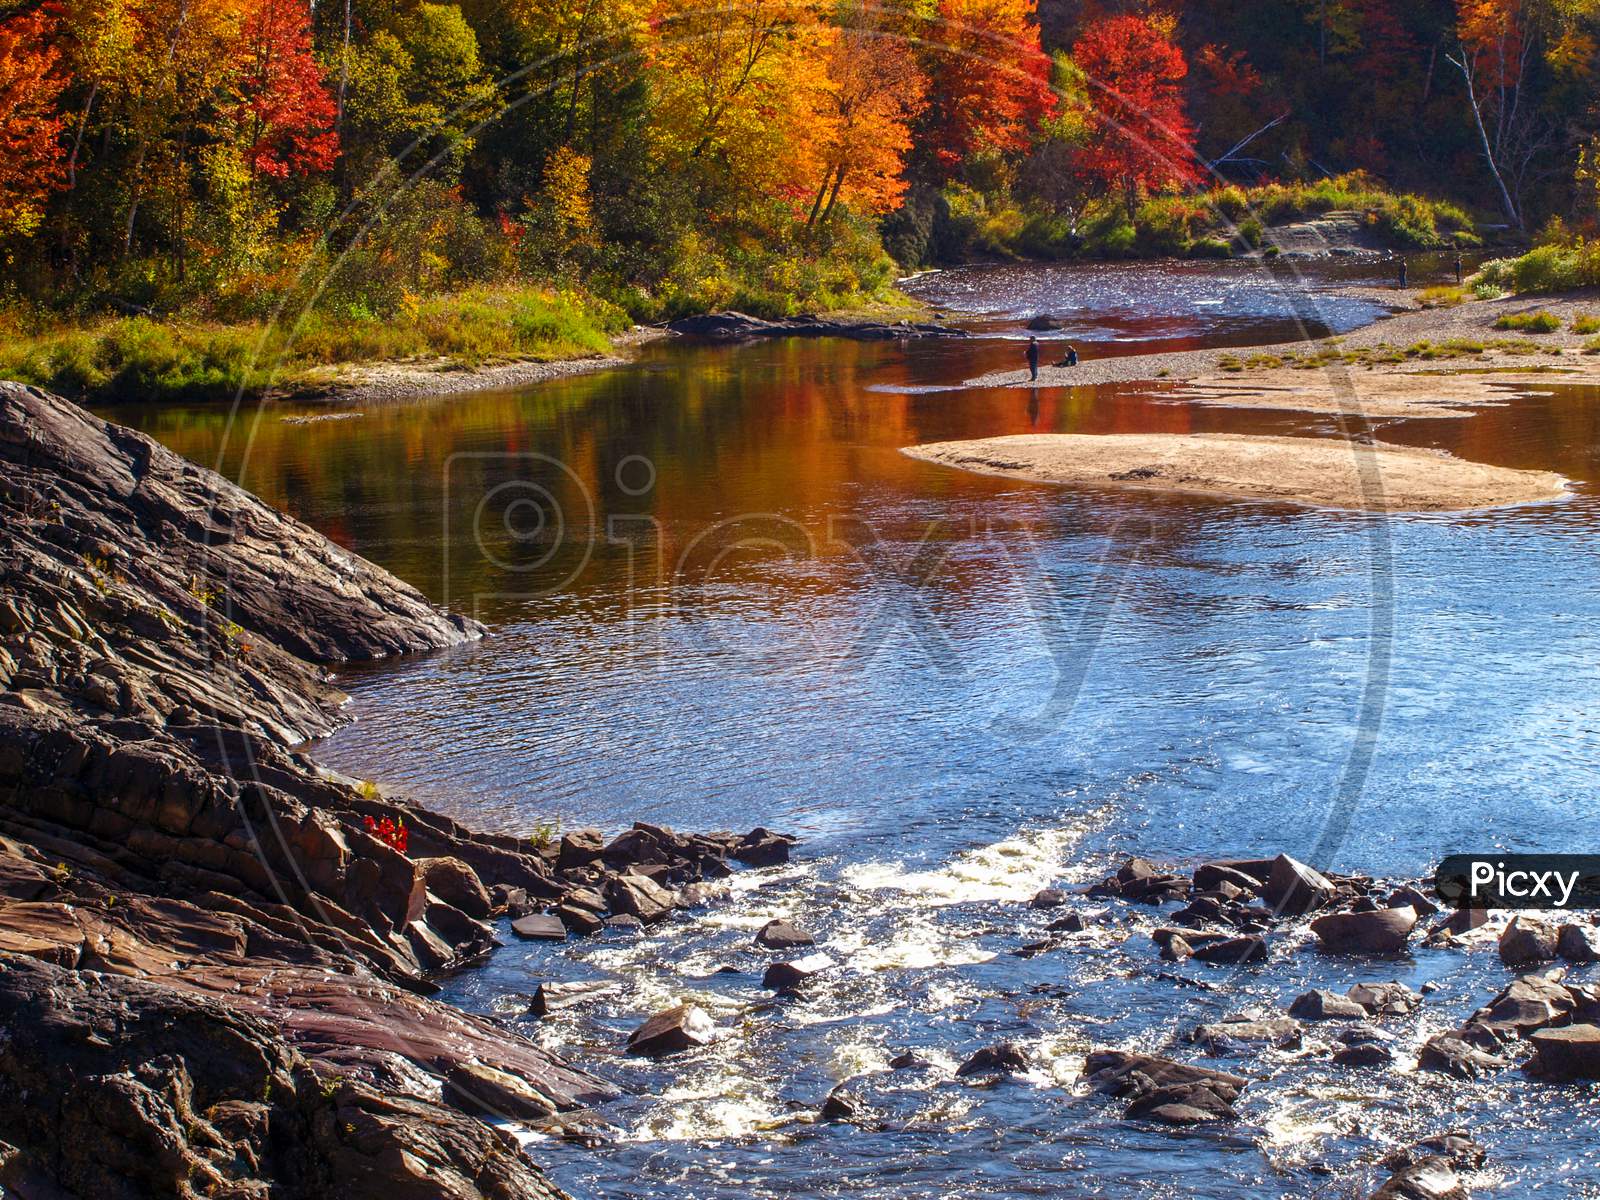 Fishing and relaxing near the river in Fall, Chutes Prov Park, ON, Canada